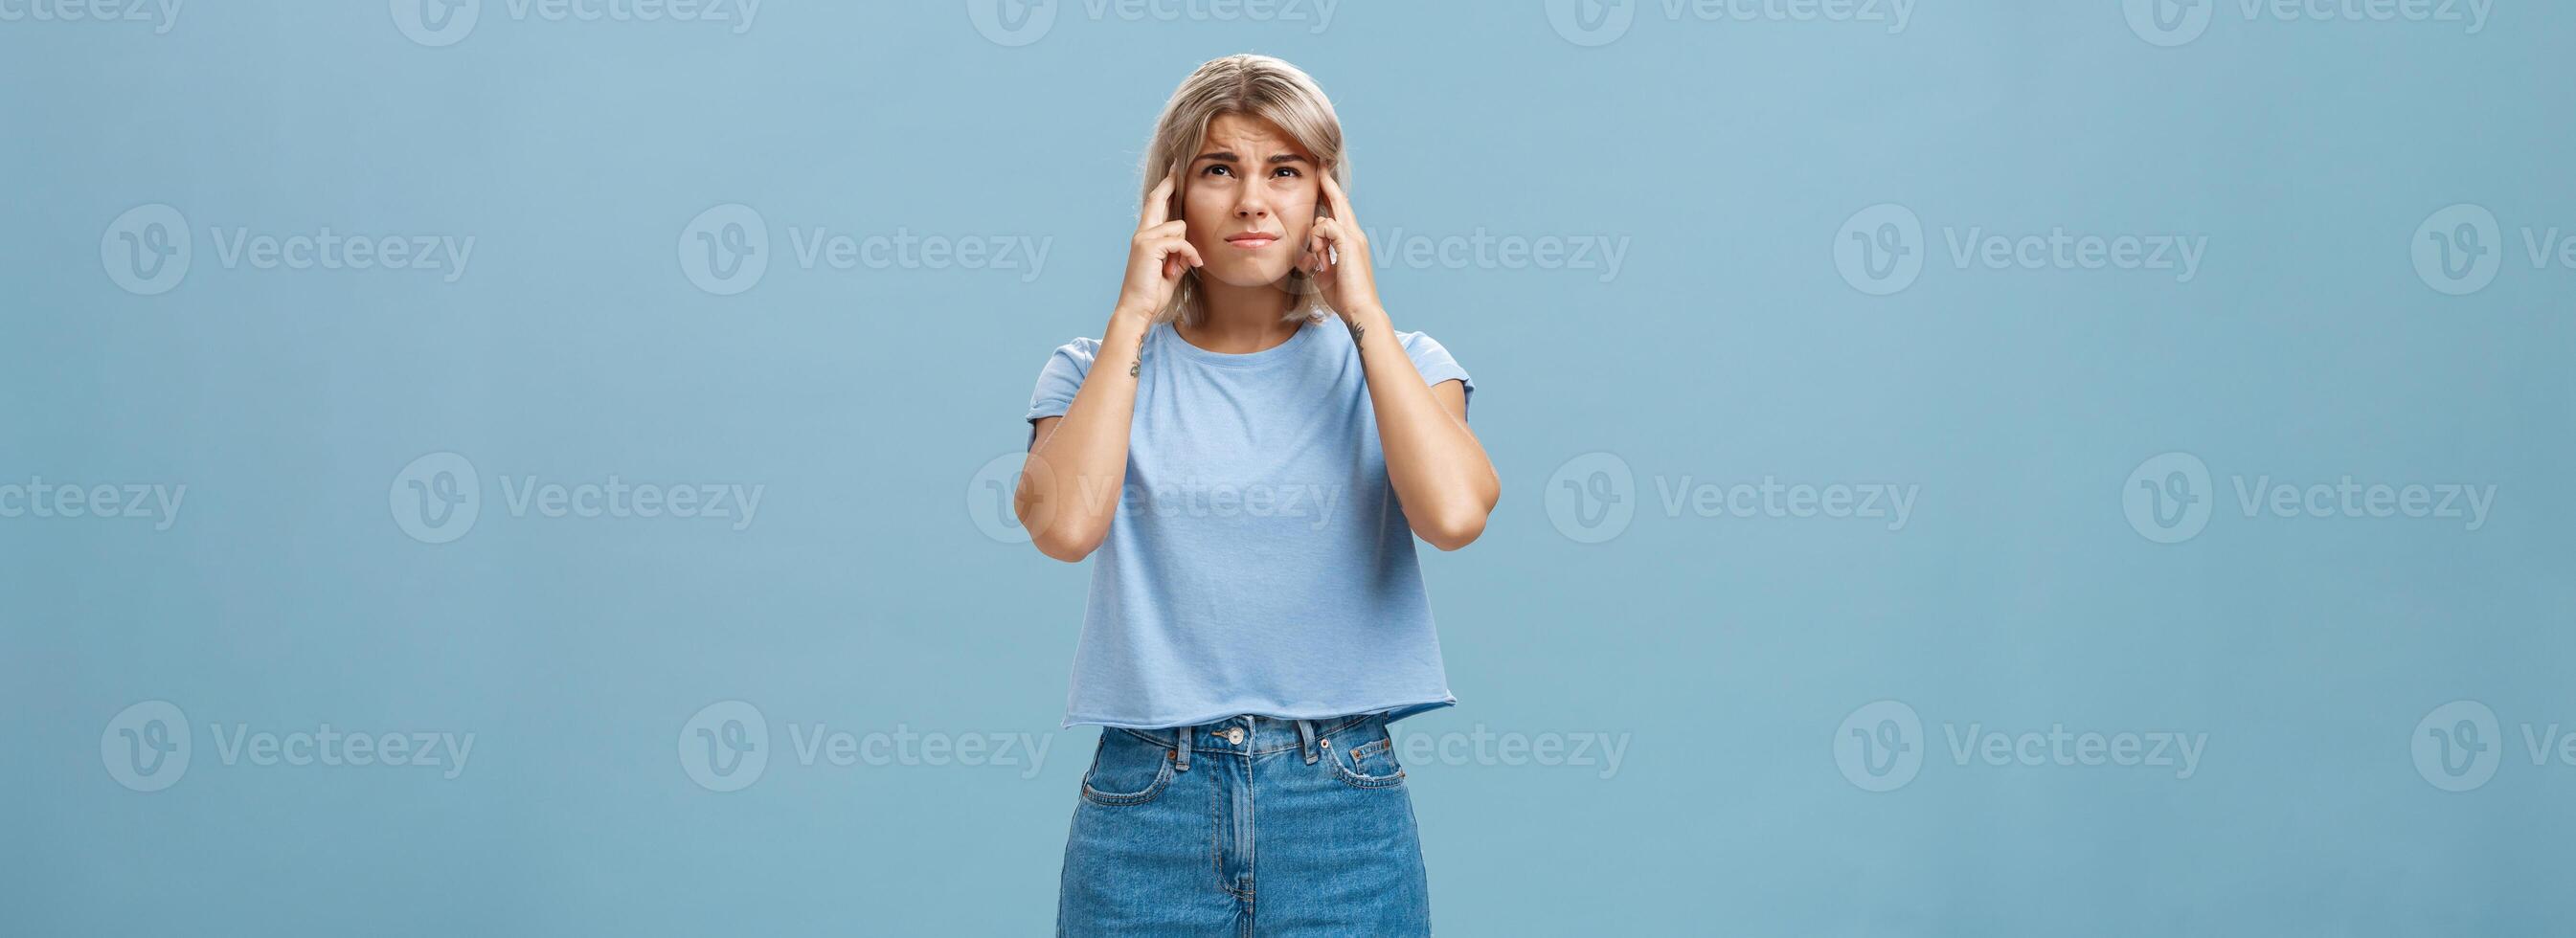 Girl cannot concentrate hearing loud noise comming from upstairs frowning feeling intense and dissatisfied closing ears with index fingers looking up while complaining on awful sound over blue wall photo